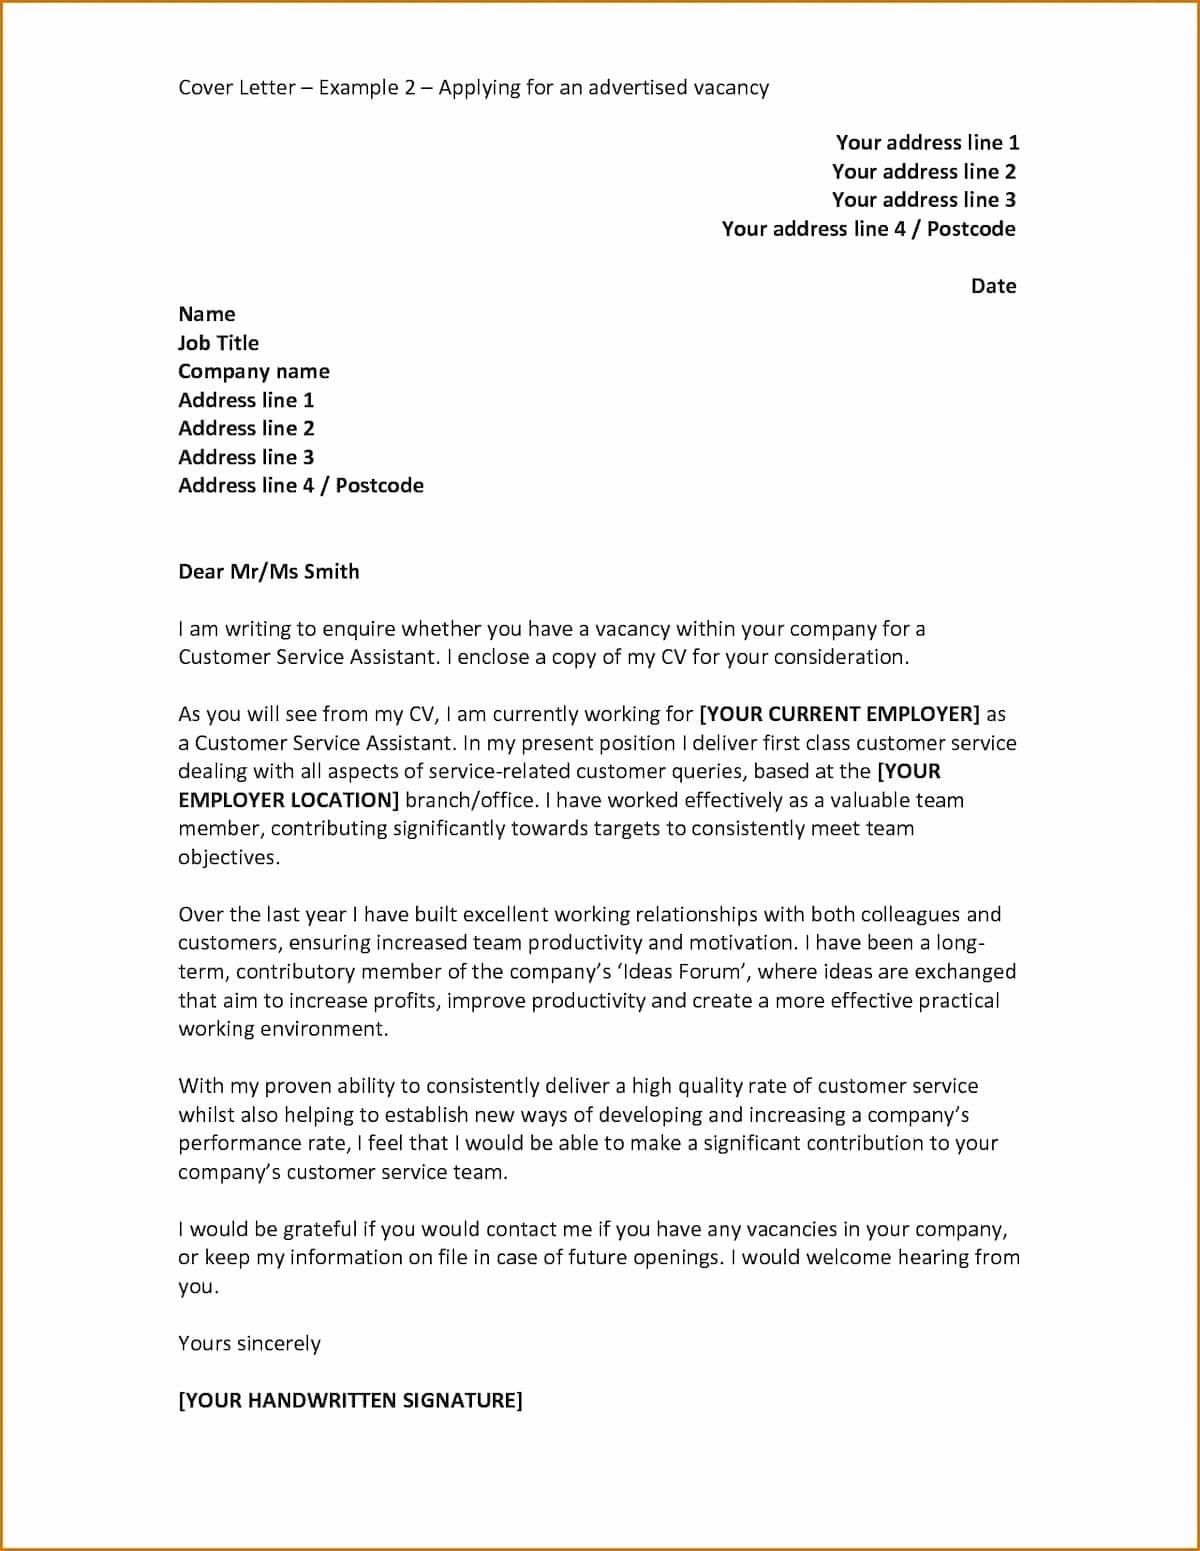 Letter Of Application Examples Elegant How to Write An Application Letter for Employment In Ghana